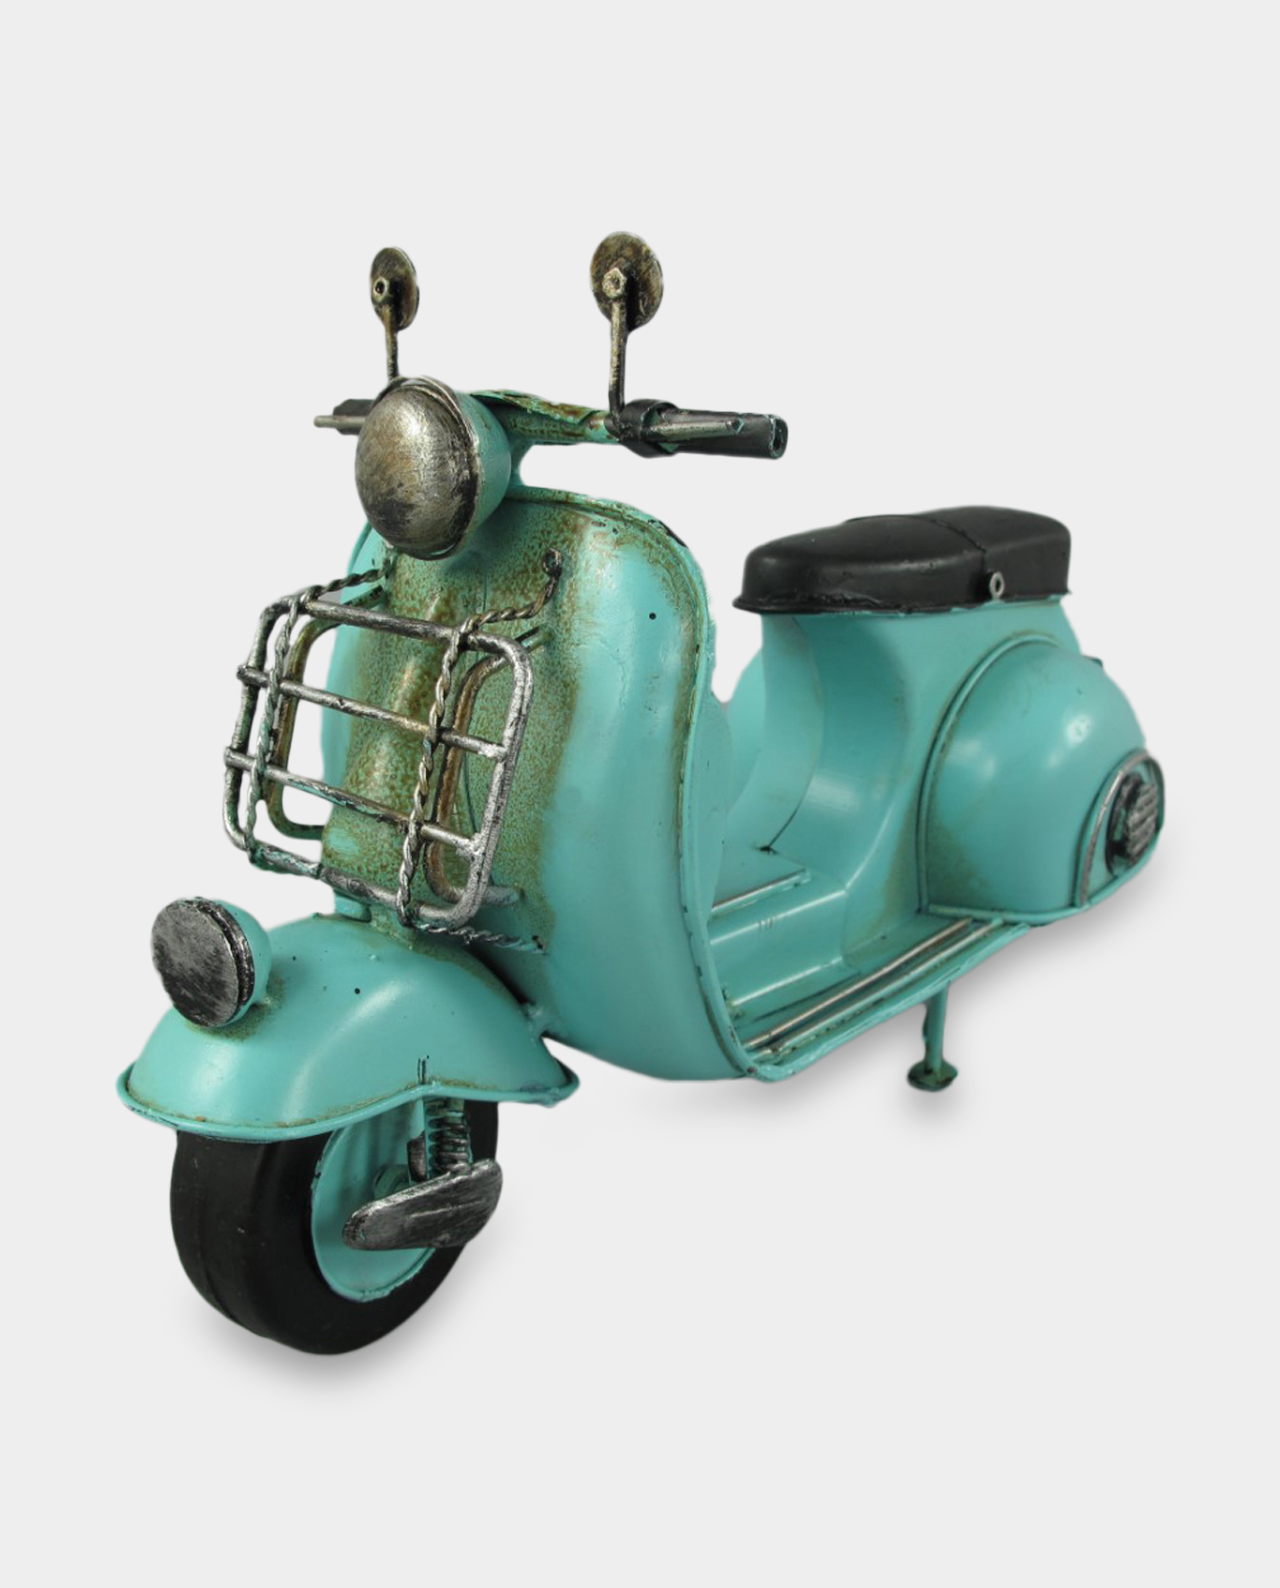 Scooter Vespa Mint Metal Model, Great Gift for Vehicle and Motor